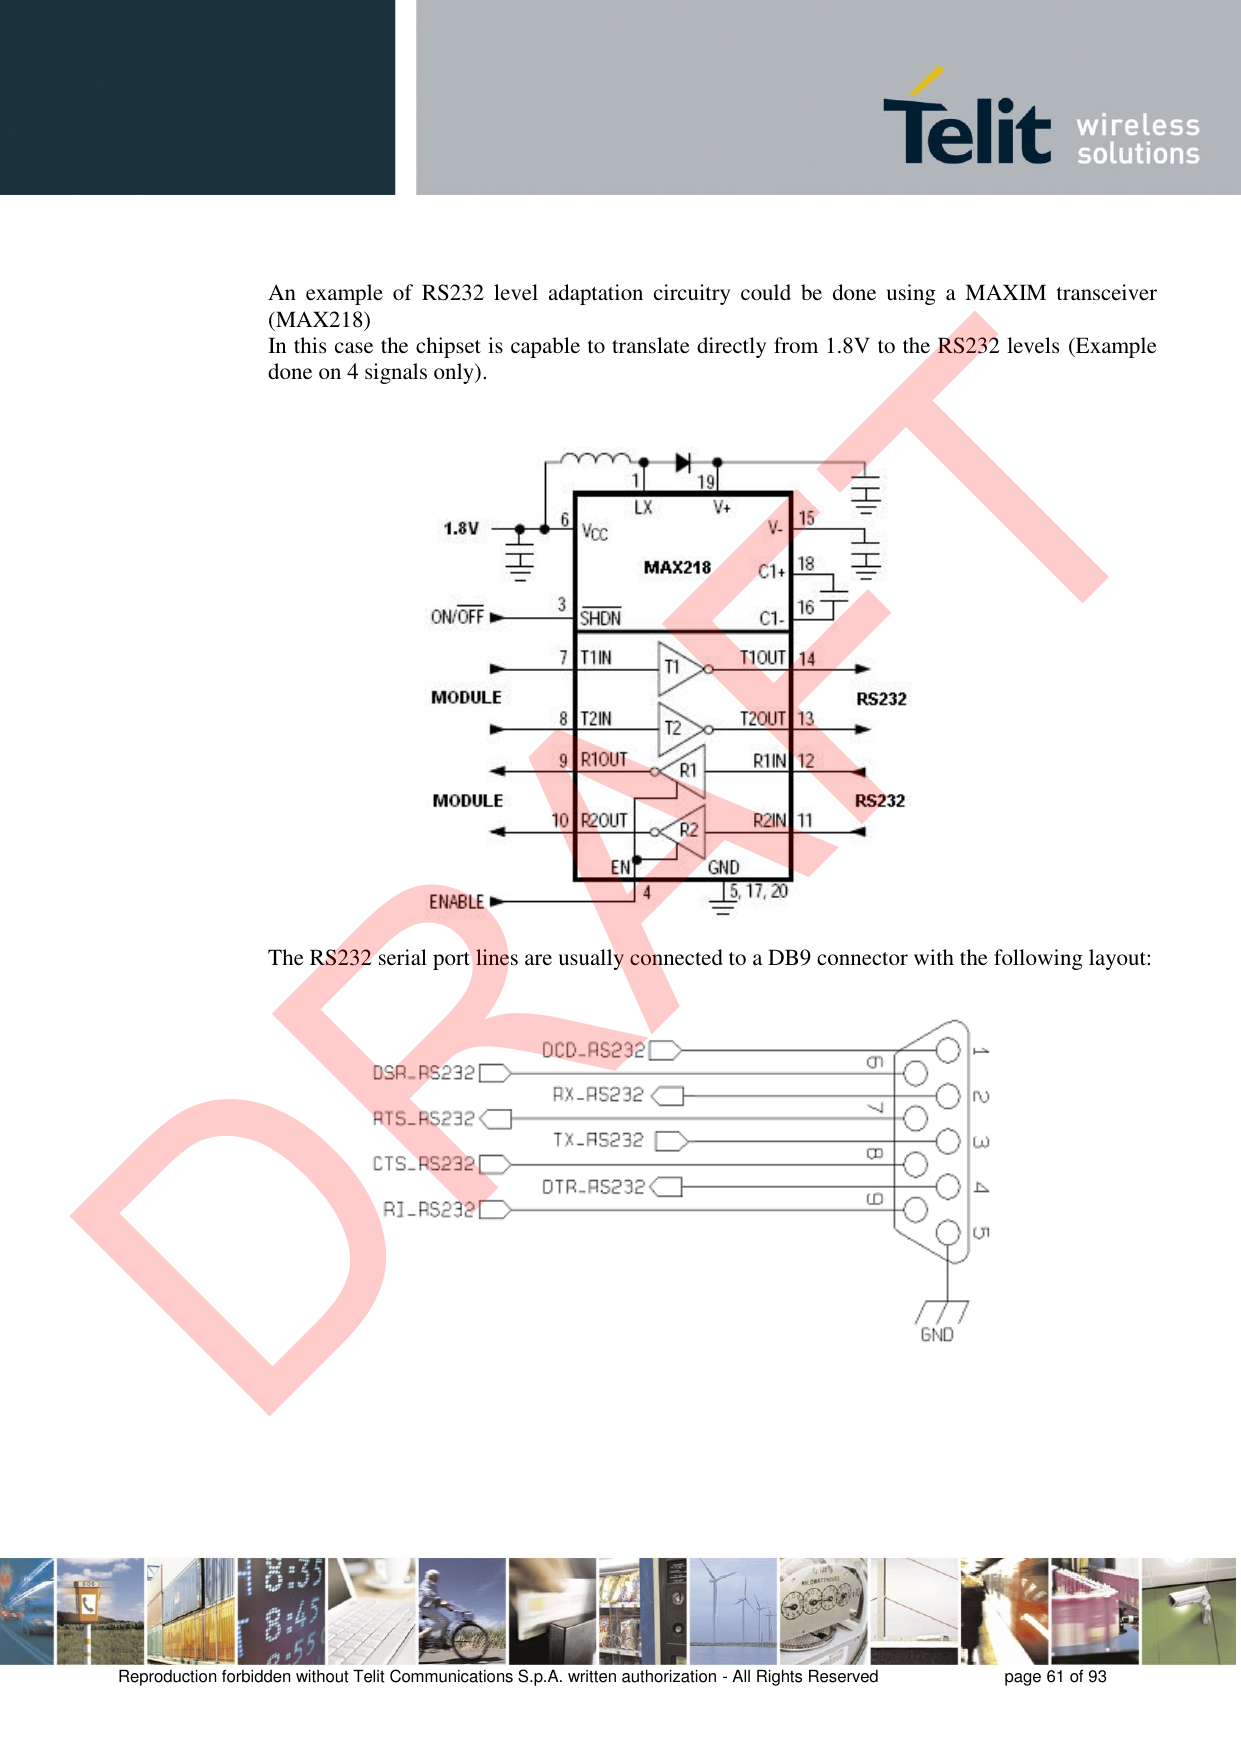 Reproduction forbidden without Telit Communications S.p.A. written authorization - All Rights Reserved  page 61 of 93 An  example  of  RS232  level  adaptation  circuitry  could  be  done  using  a  MAXIM transceiver (MAX218)  In this case the chipset is capable to translate directly from 1.8V to the RS232 levels (Example done on 4 signals only). The RS232 serial port lines are usually connected to a DB9 connector with the following layout: DRAFT